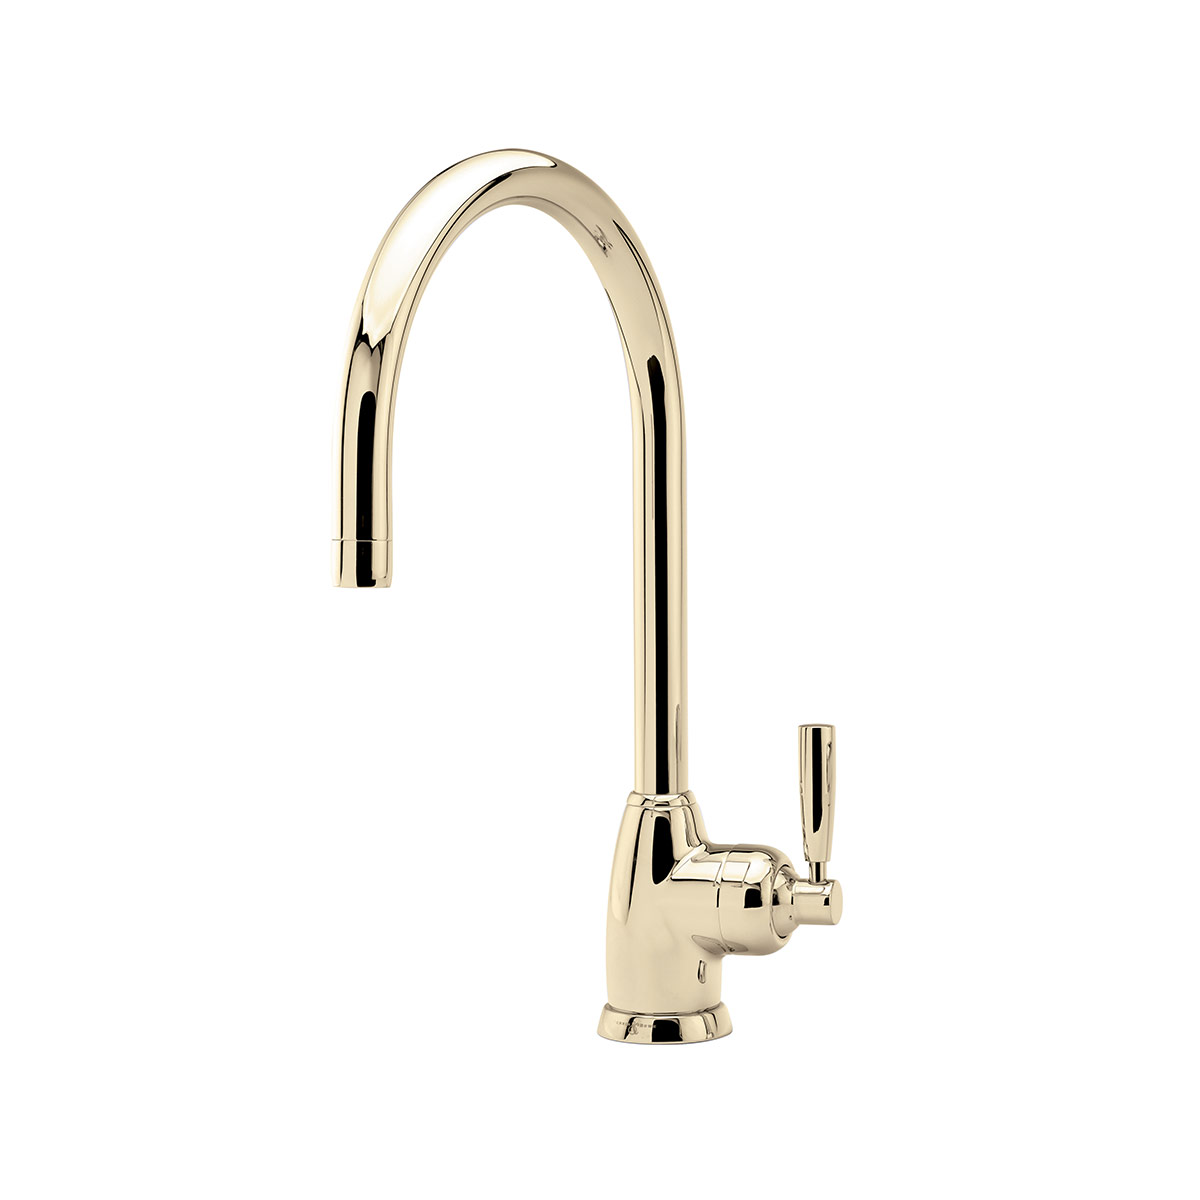 Shaws by Perrin & Rowe Roeburn kitchen mixer in Gold. Mimas style monobloc kitchen tap AUSH.4841. Distributed in Australia by Luxe by Design, Brisbane.